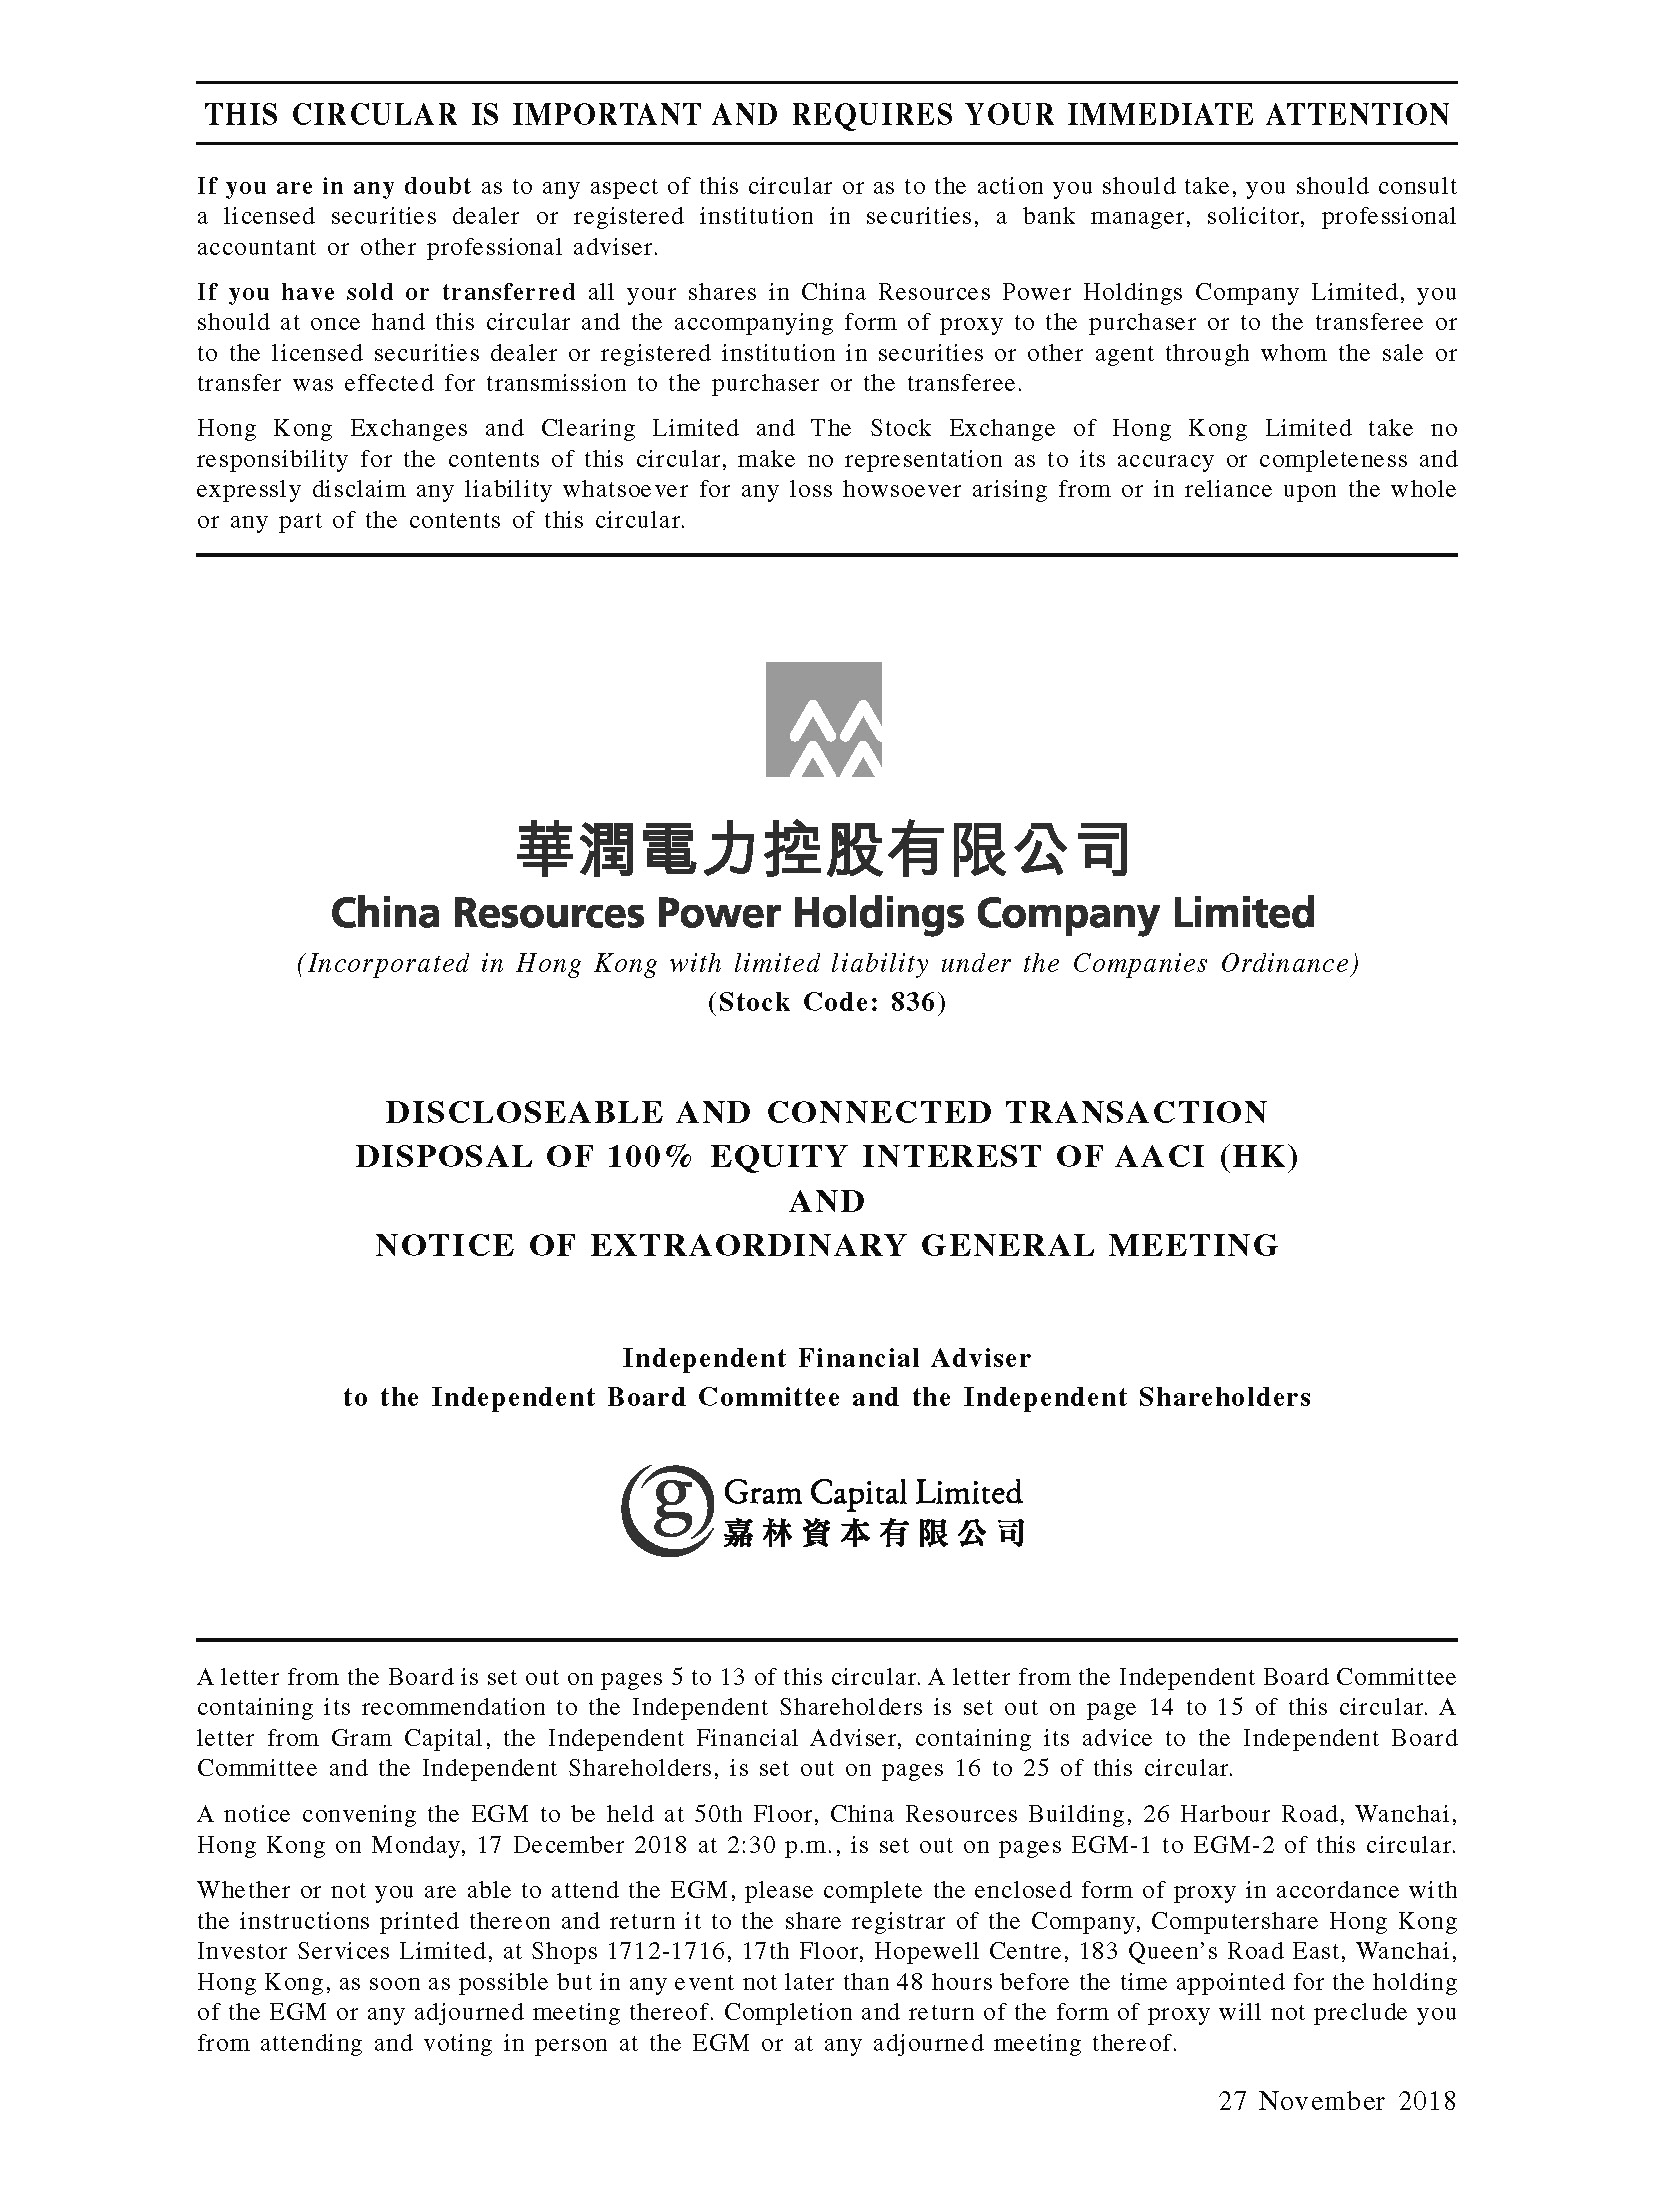 China Resources Power Holdings Company Limited